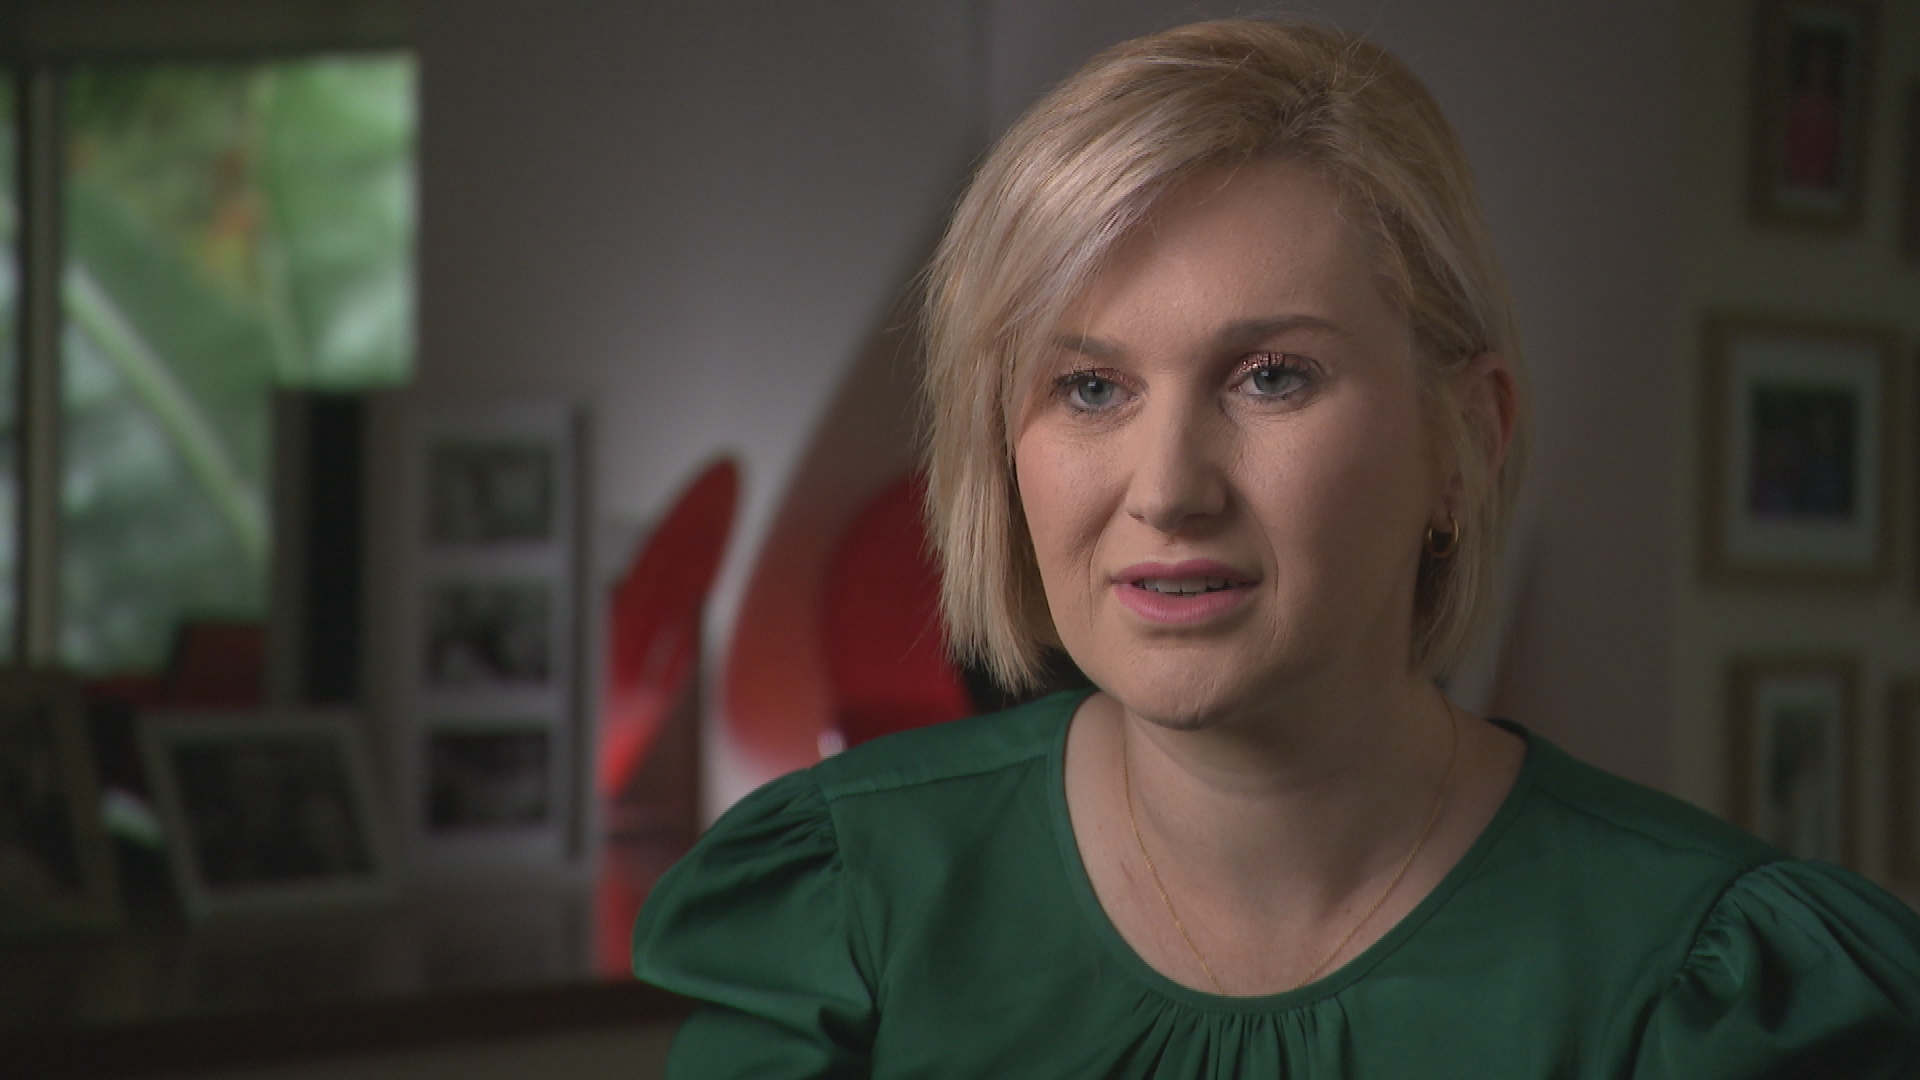 Gemma, who was diagnosed with bowel cancer in early 2020, said new treatments and better awareness are pivotal to beating the disease.